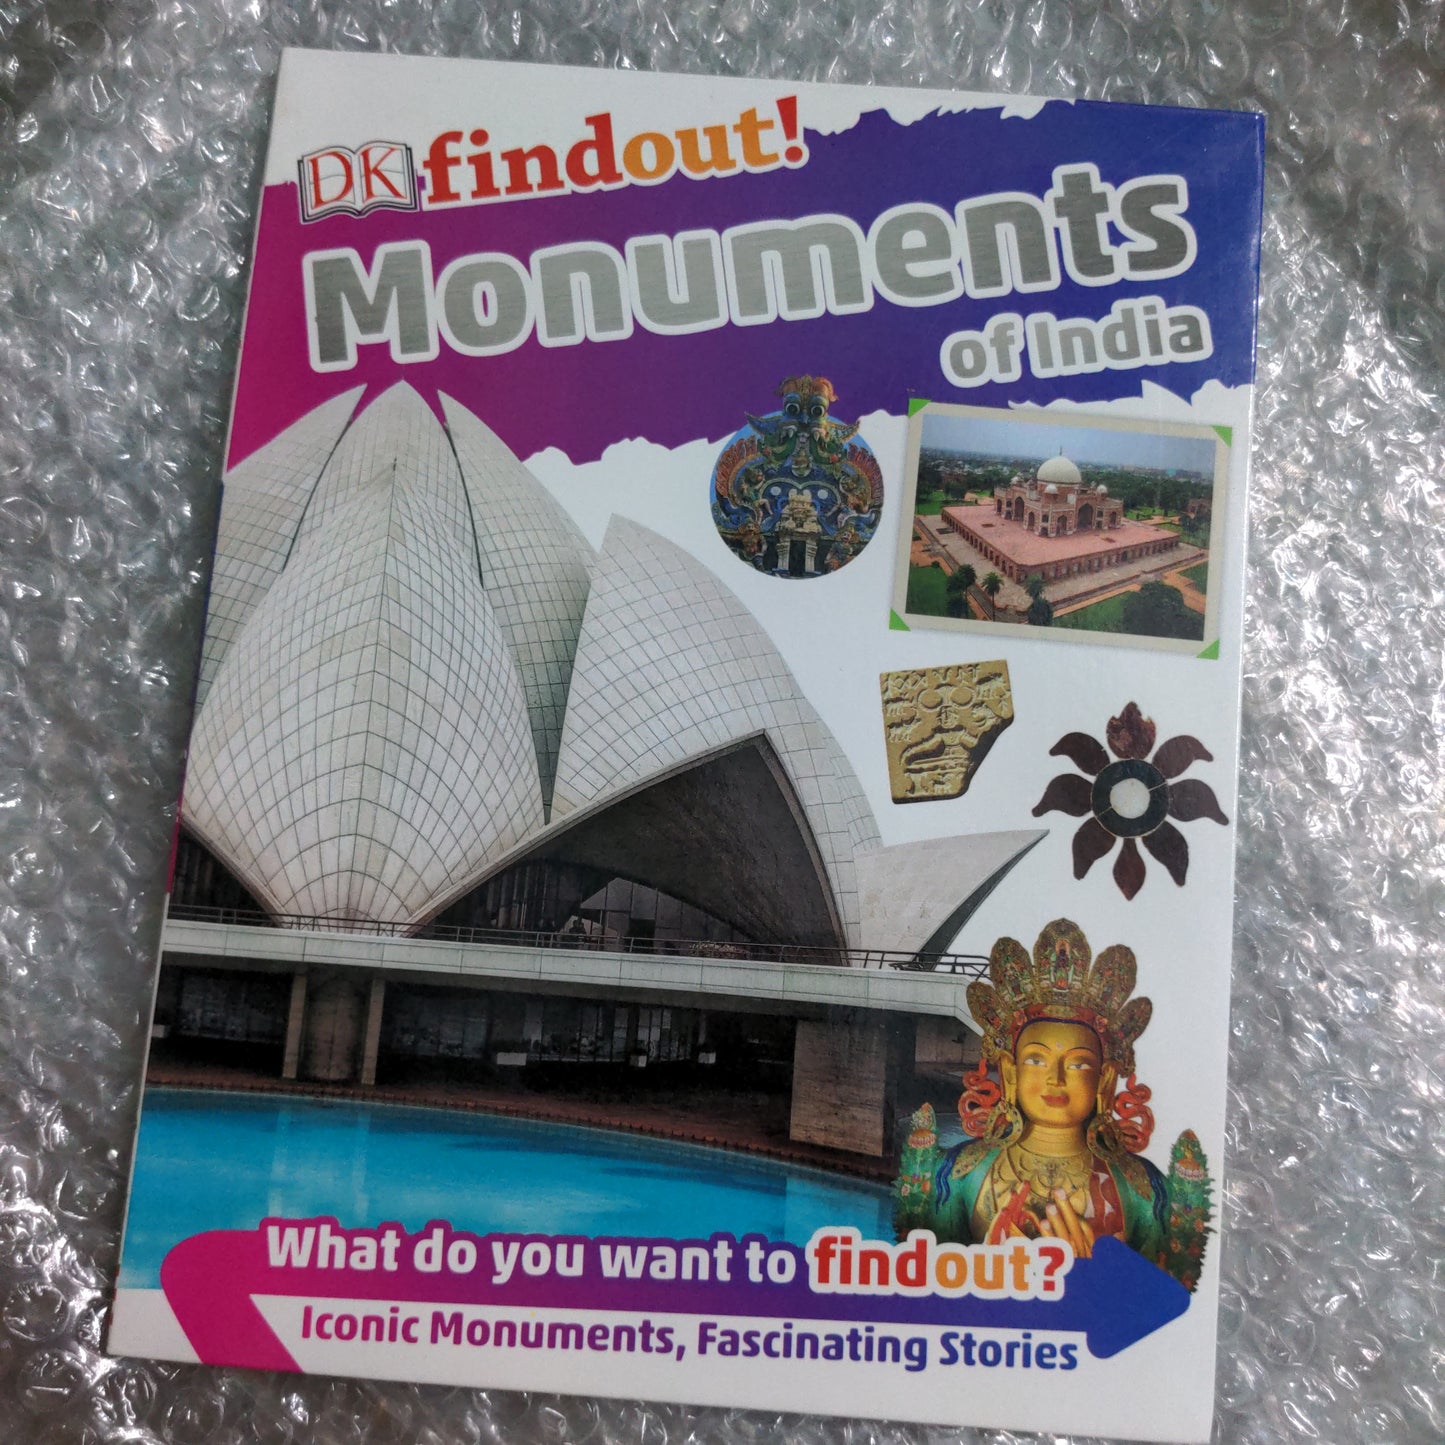 DK findout! Monuments of India